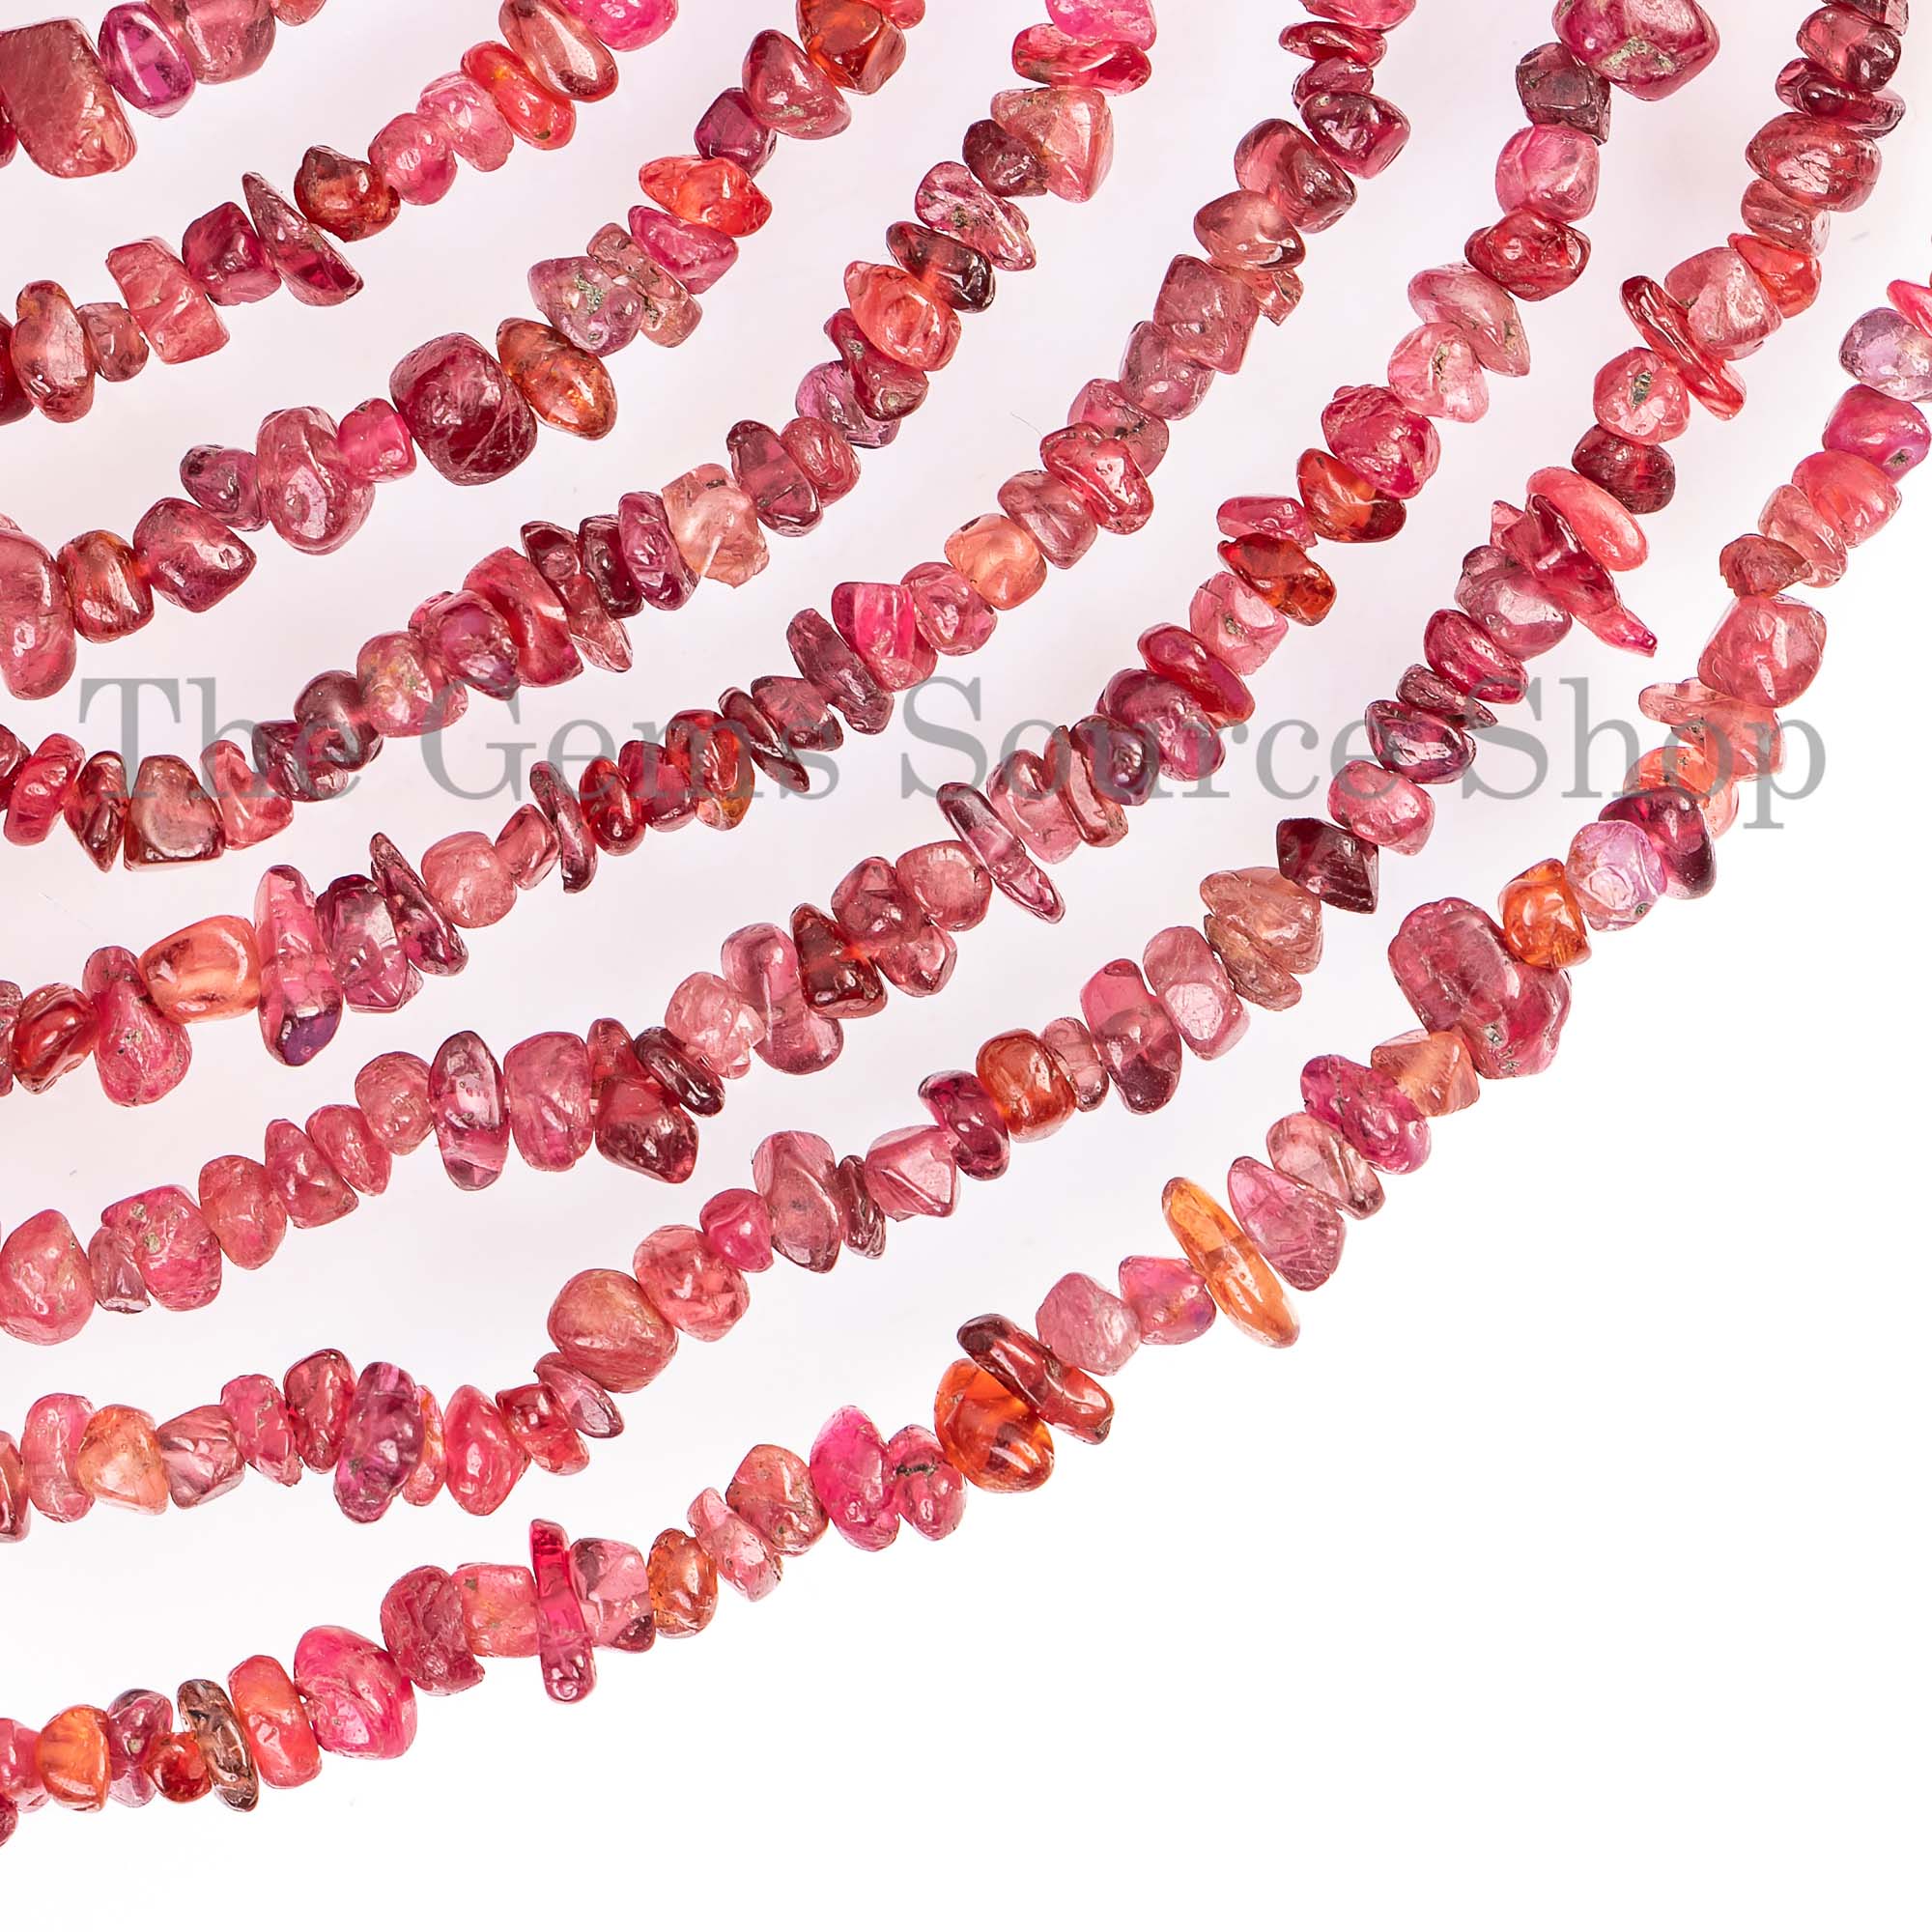 Red Spinel Plain Chip Beads, Red Spinel Uncut Beads, Spinel Chip Beads, Red Spinel Beads